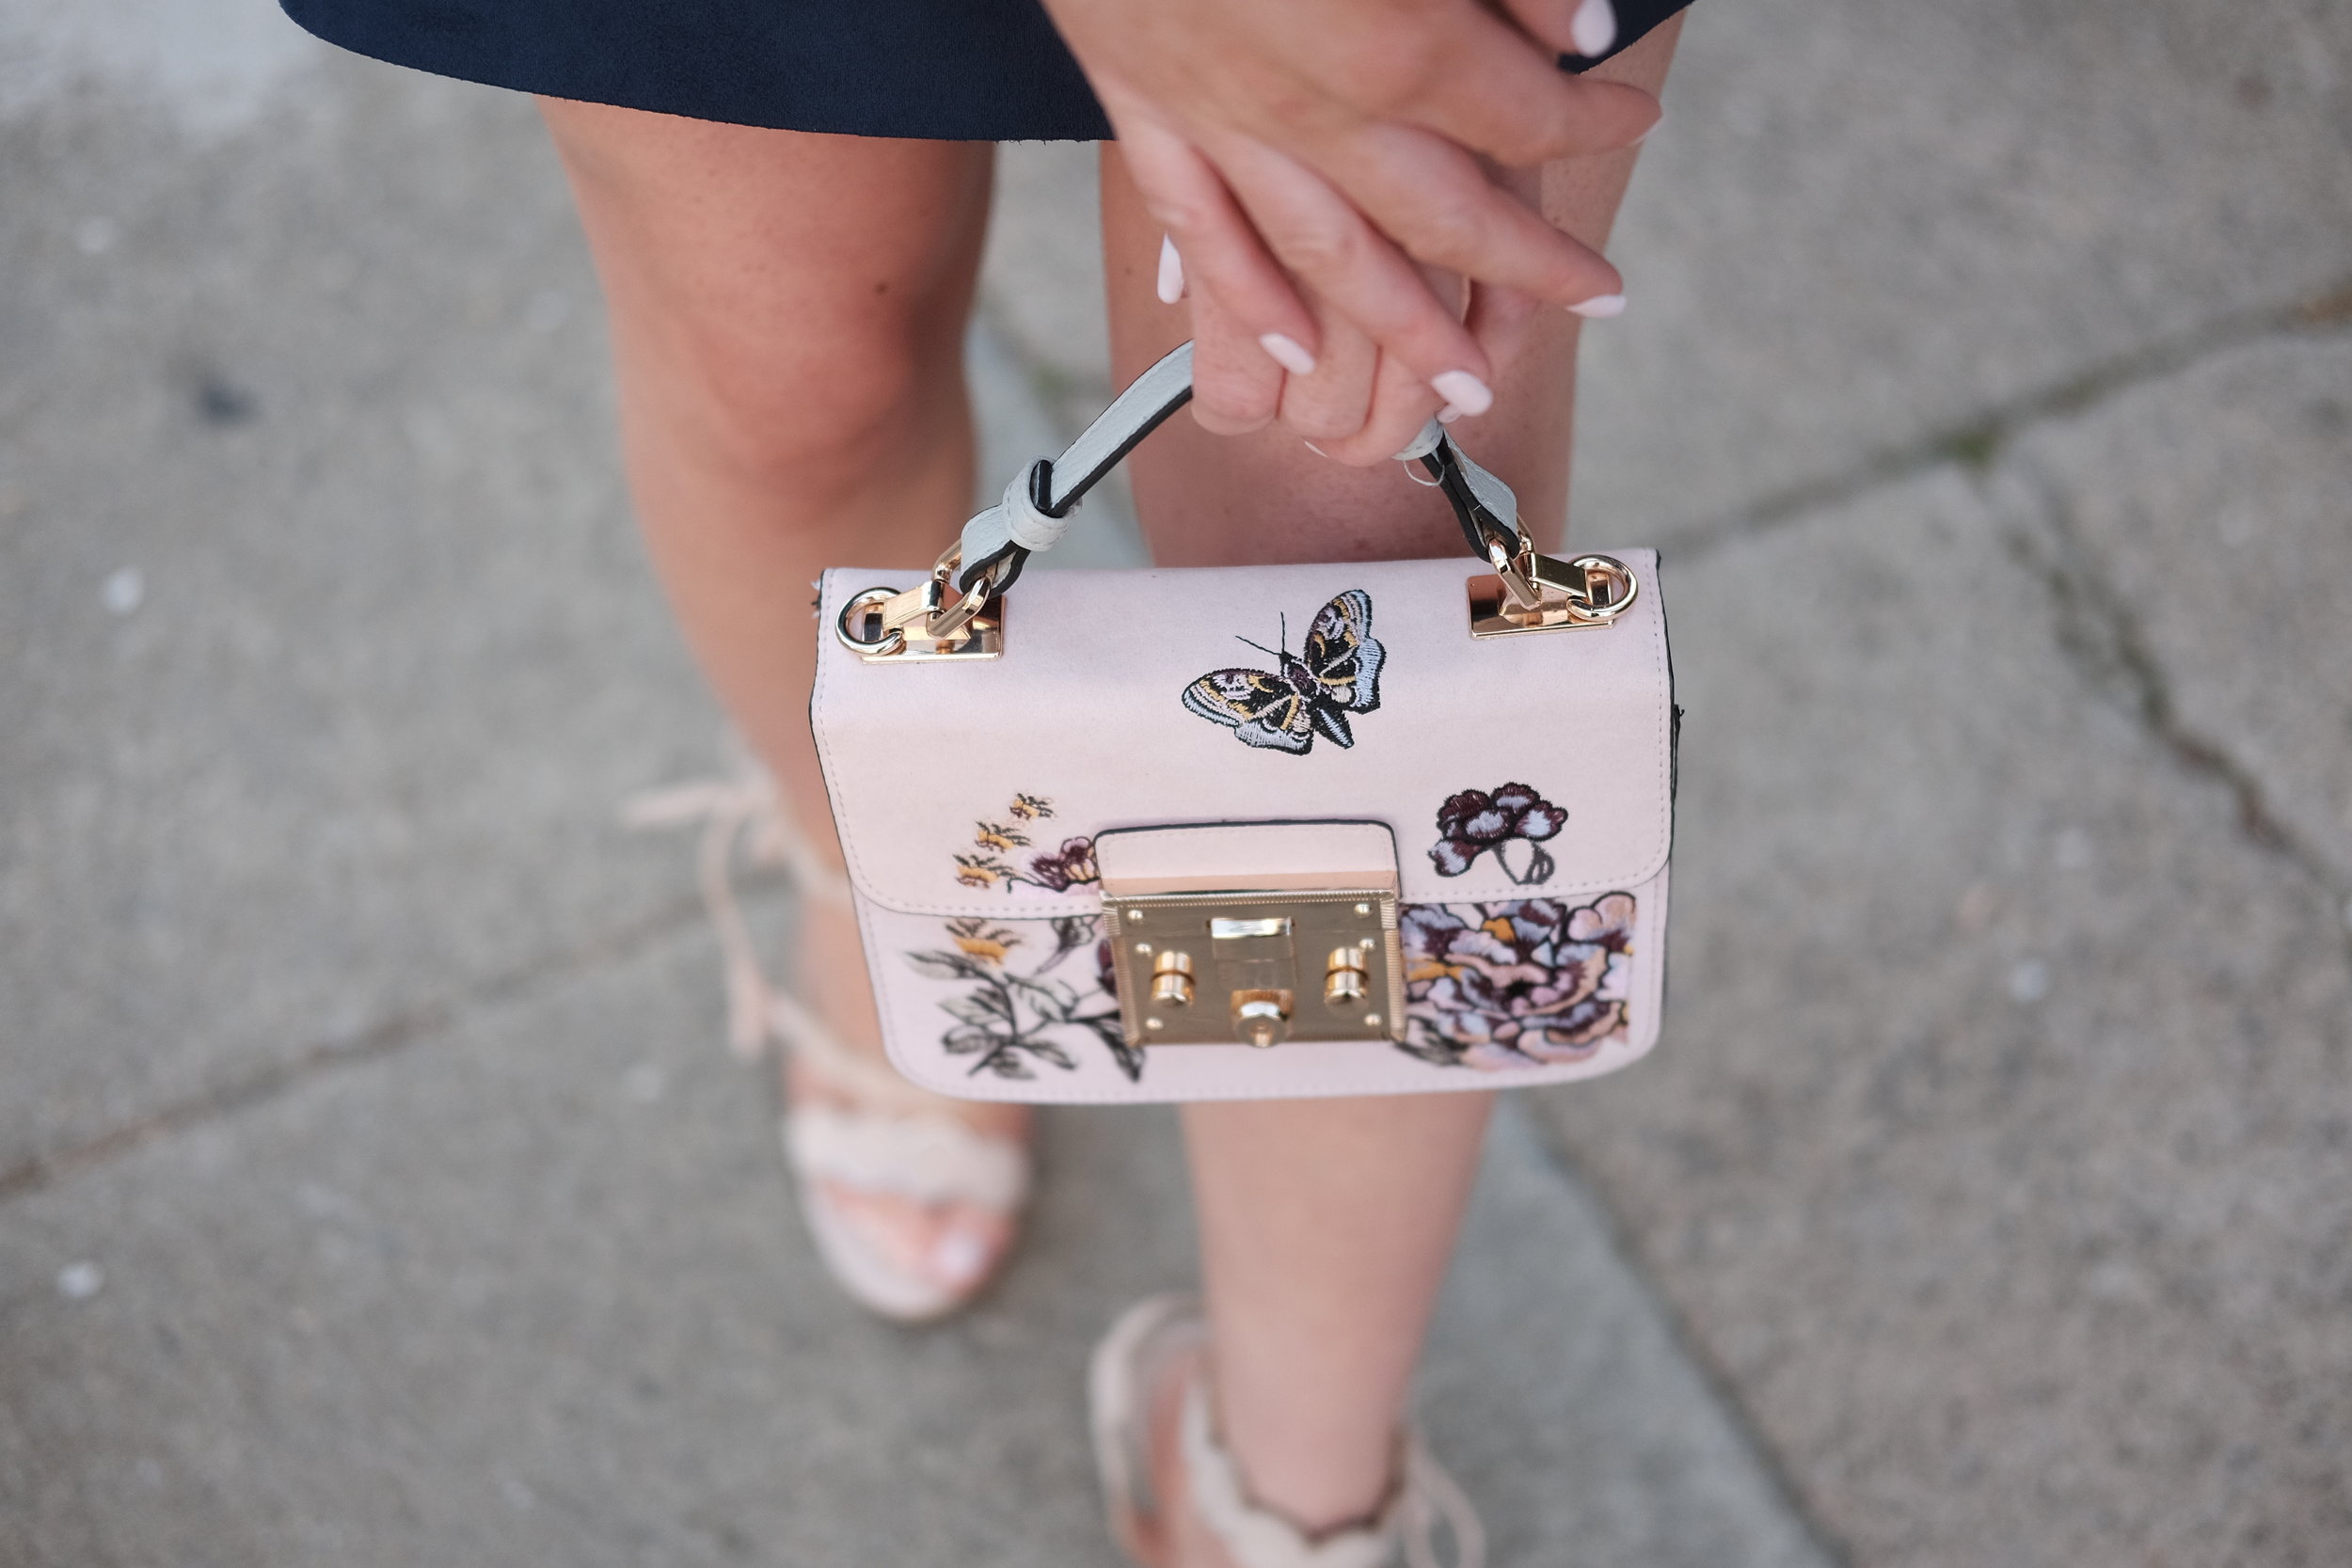 LTrending purses for Spring Summer 2021 are floral. There are so many amazing floral handbags, floral clutches, floral backpacks, floral wallet cards and floral purses on sale for 2021.